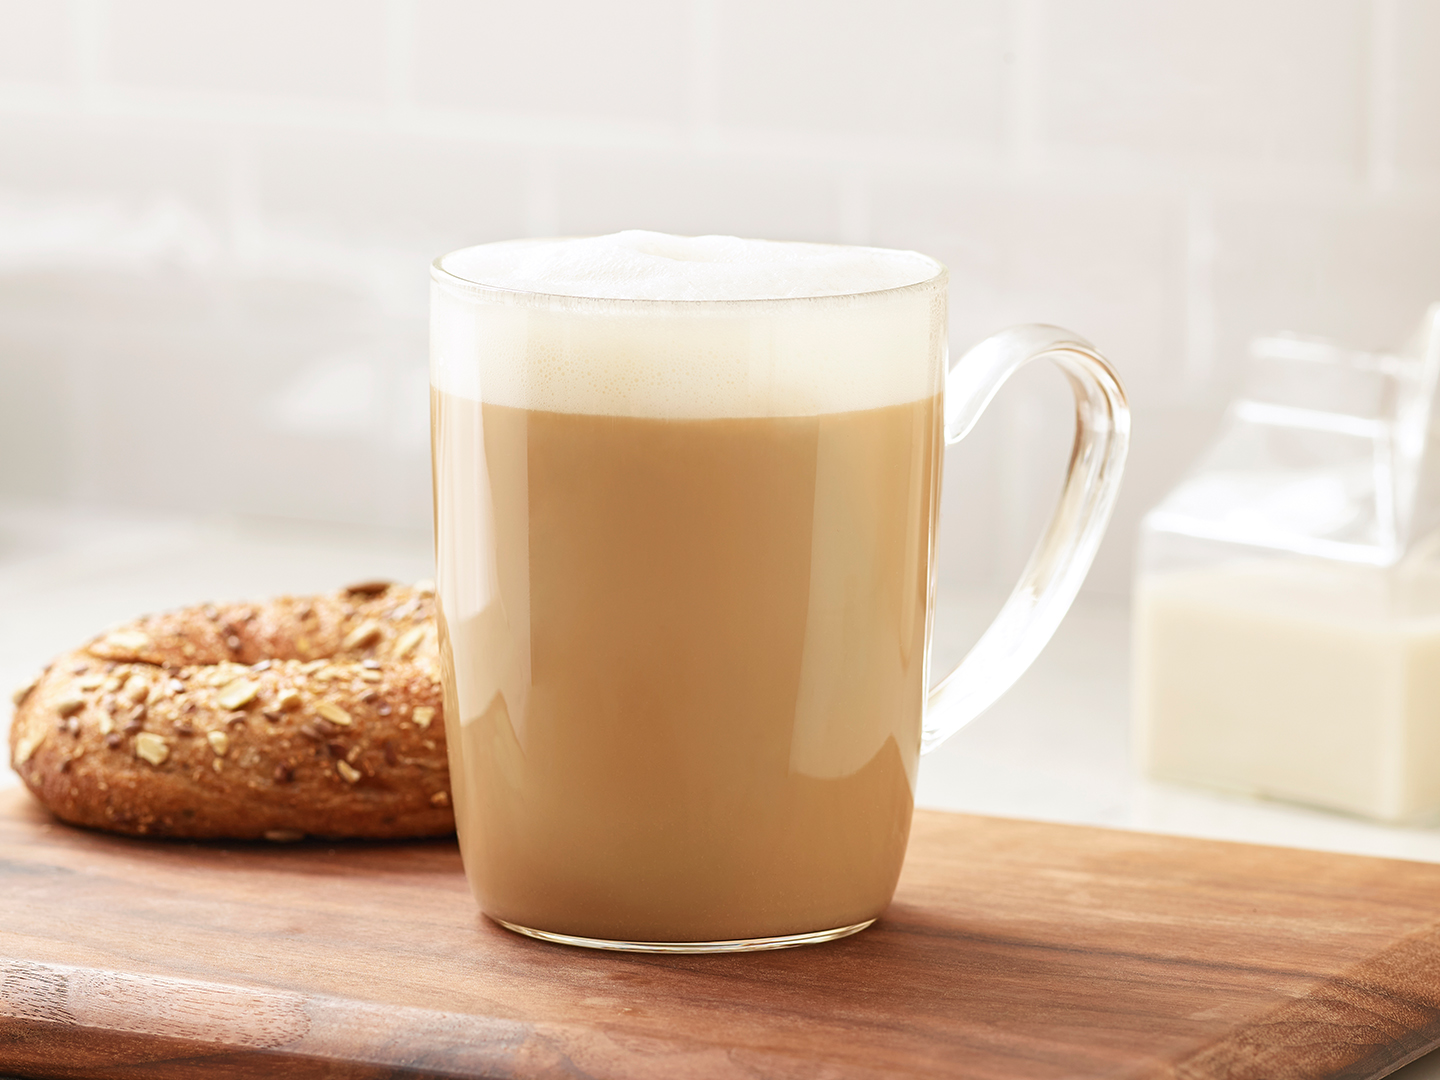 How to make a latte with the new Keurig® Milk Frother 